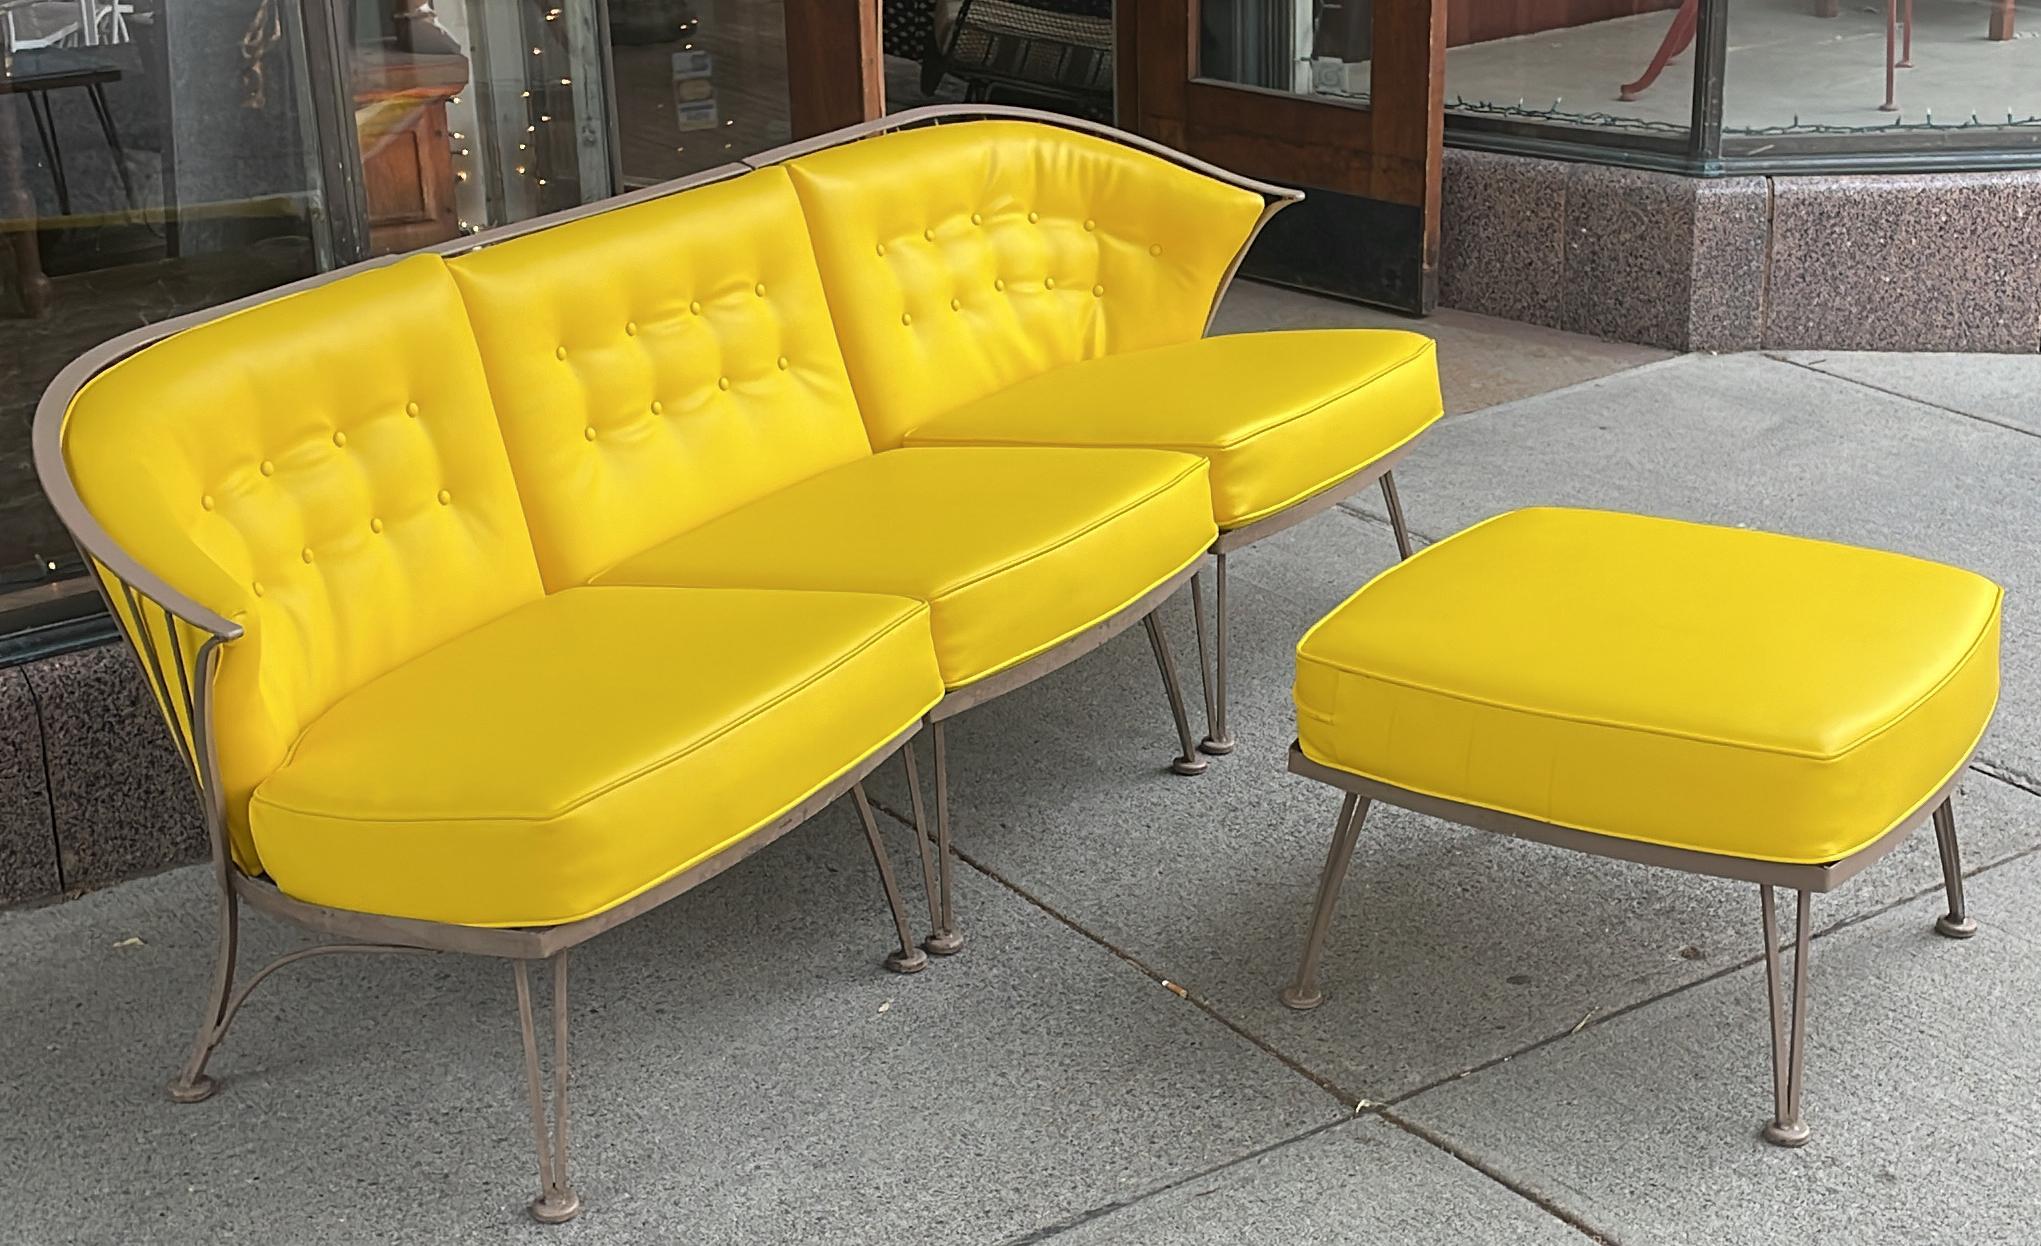 a beautiful and extremely versatile 1950's Pinecrest sectional lounge set by Woodard. the set has three pieces, two single armchairs and one armless. these can be arranged as three individual pieces, a three seat sofa, or a two piece settee with a